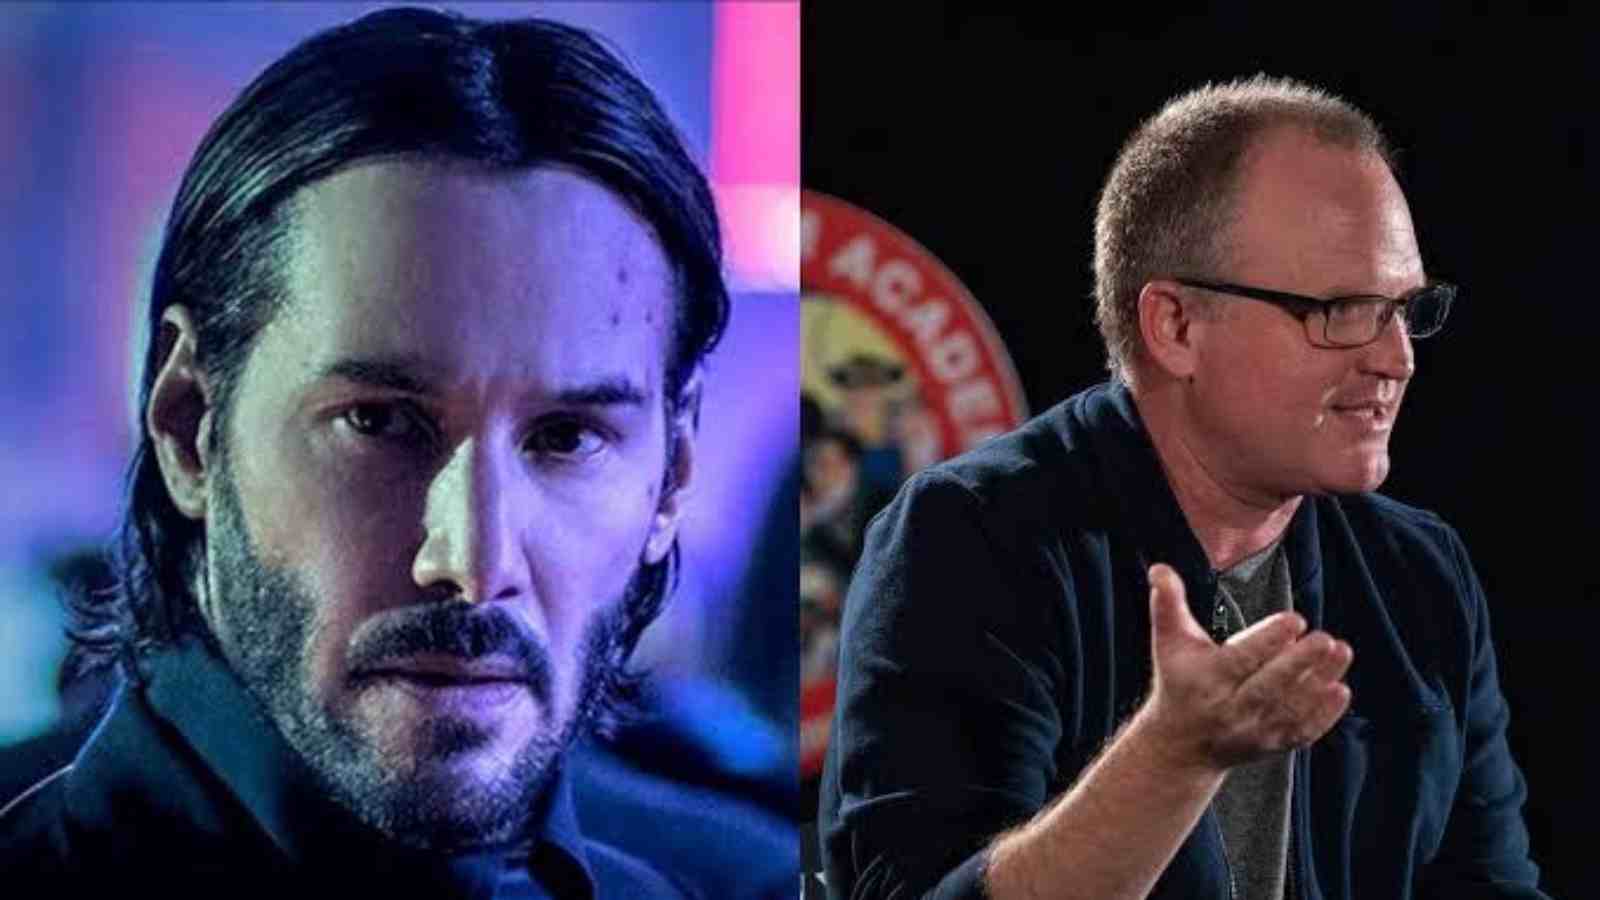 Derek Kolstad says Reeves overhauled John Wick's character so that he could play the character well